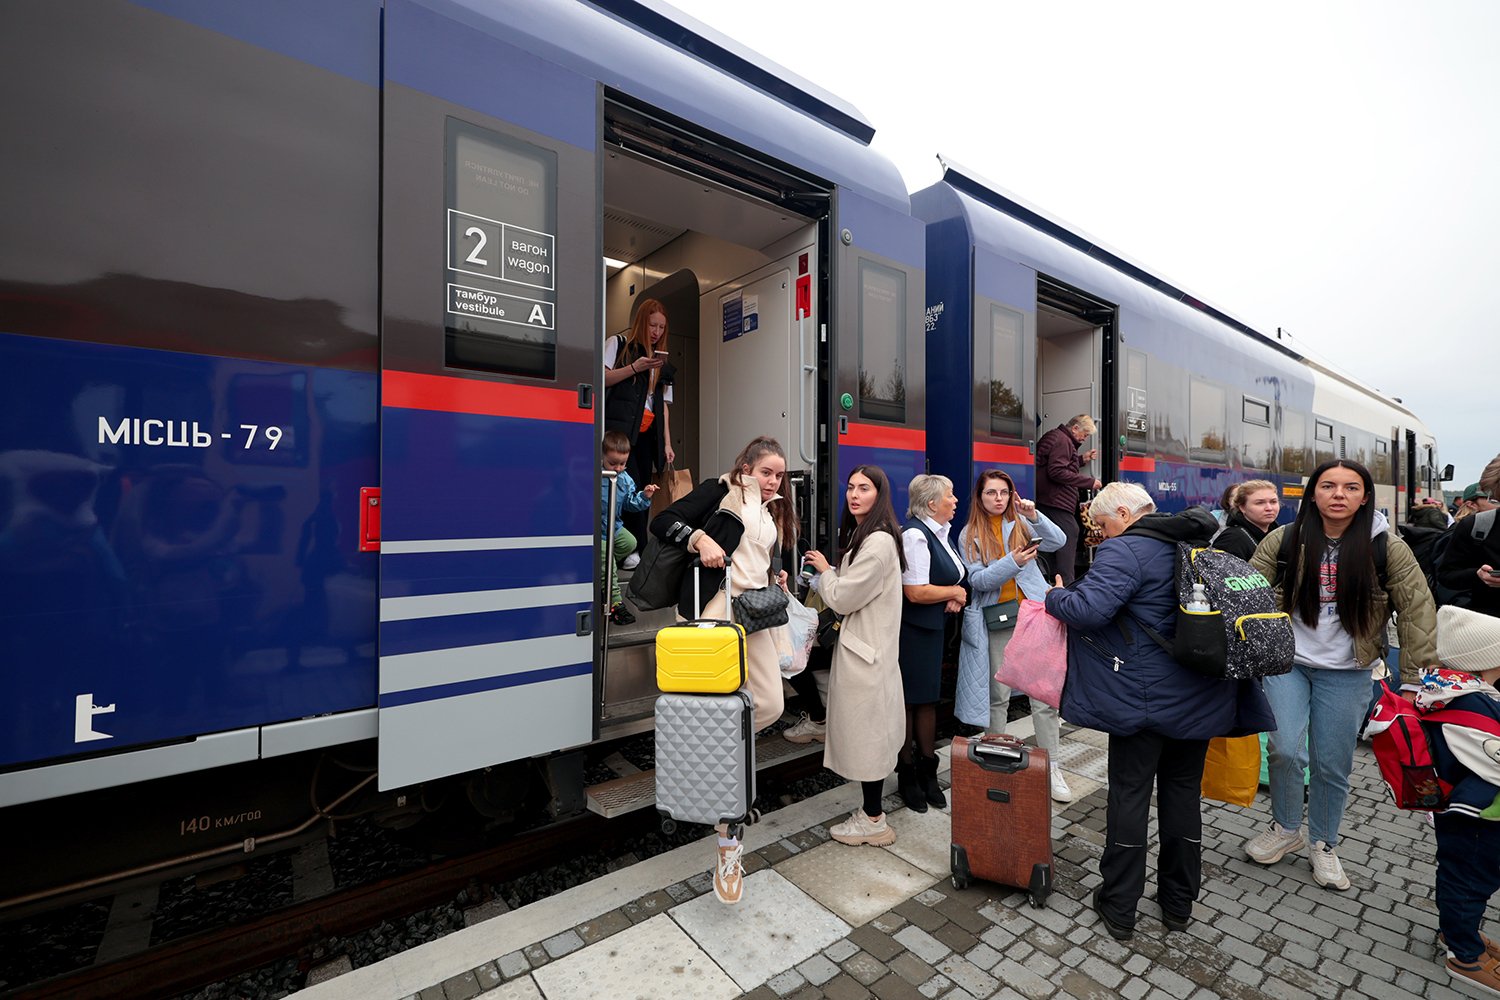 A group of passengers holding luggage and bags enter and exit a blue train with a red stripe and several red stripes as they transfer from a Ukrzaliznytsia train to a Polish SKPL transport company train.